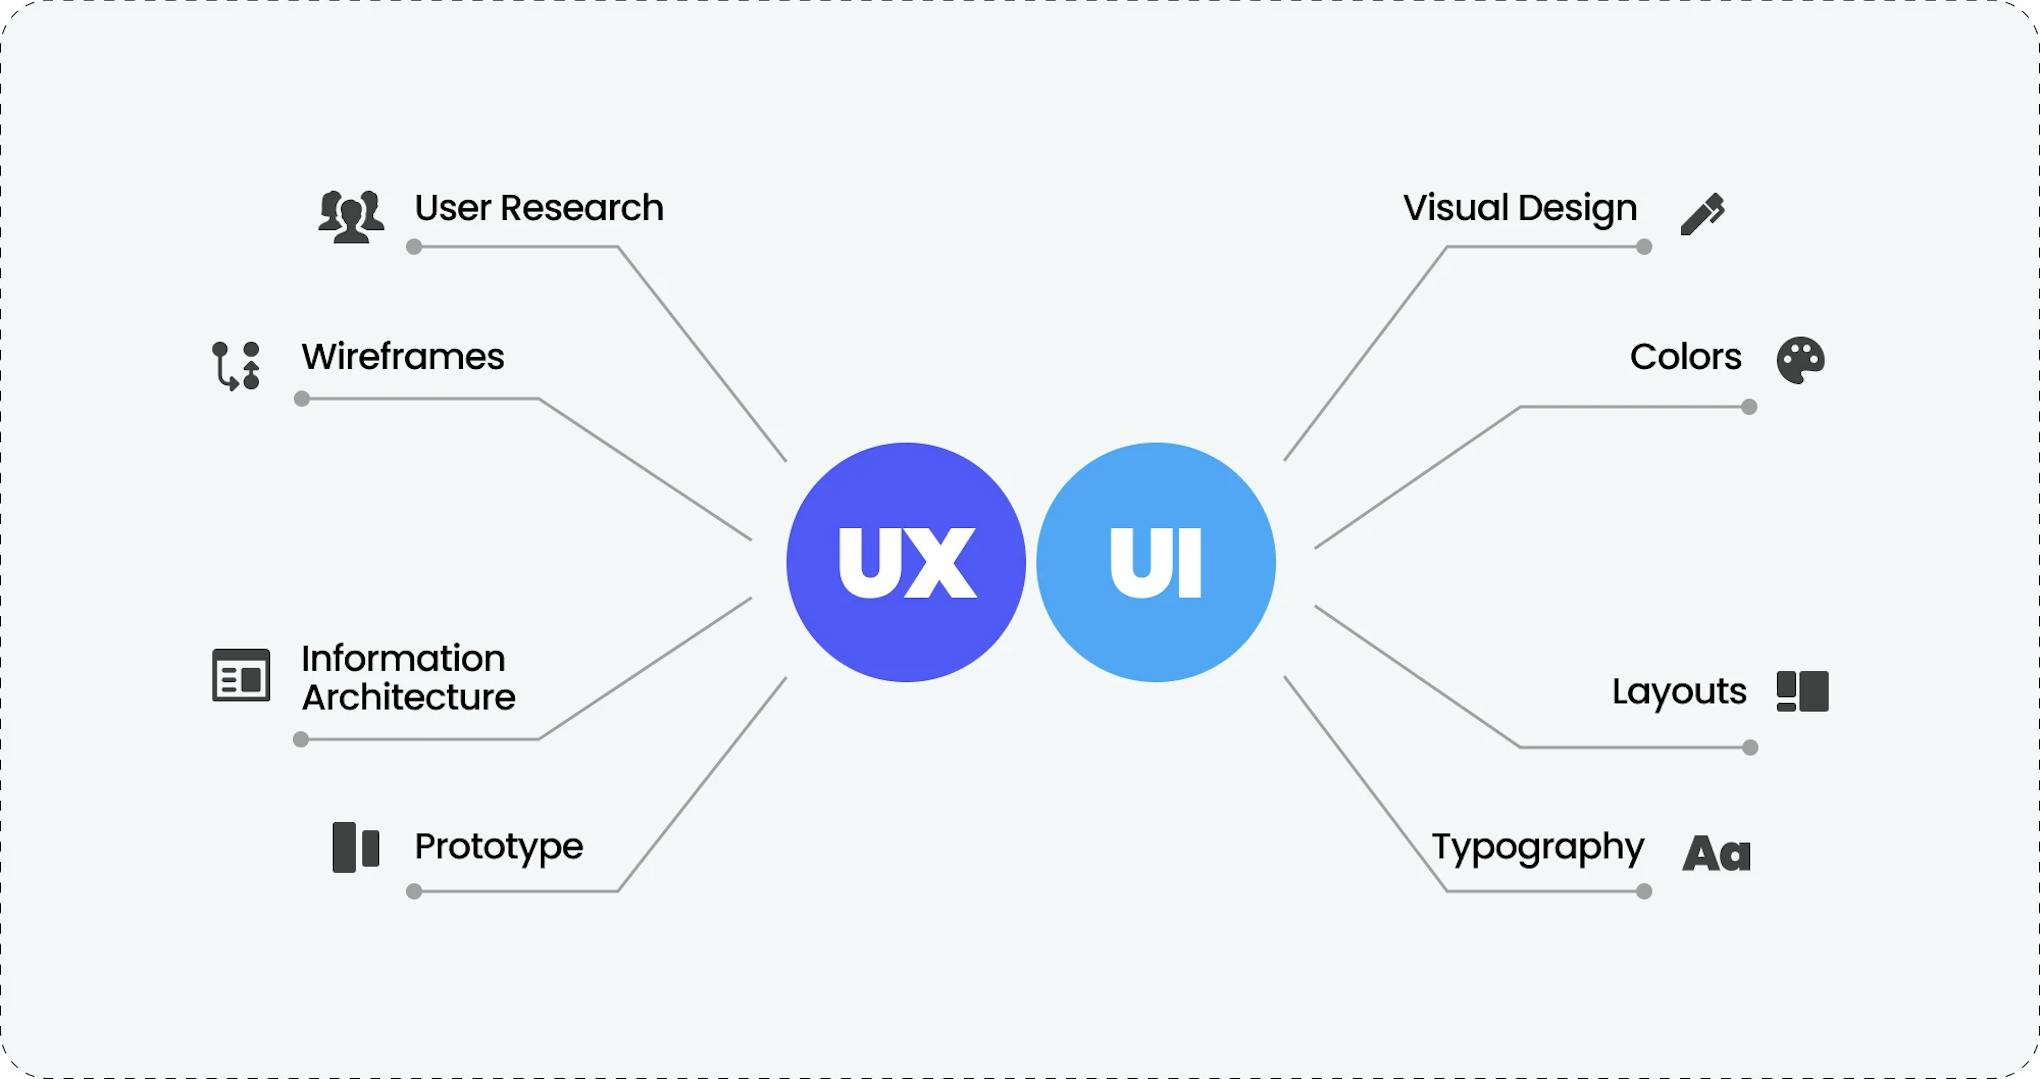 Difference between UI and UX testing